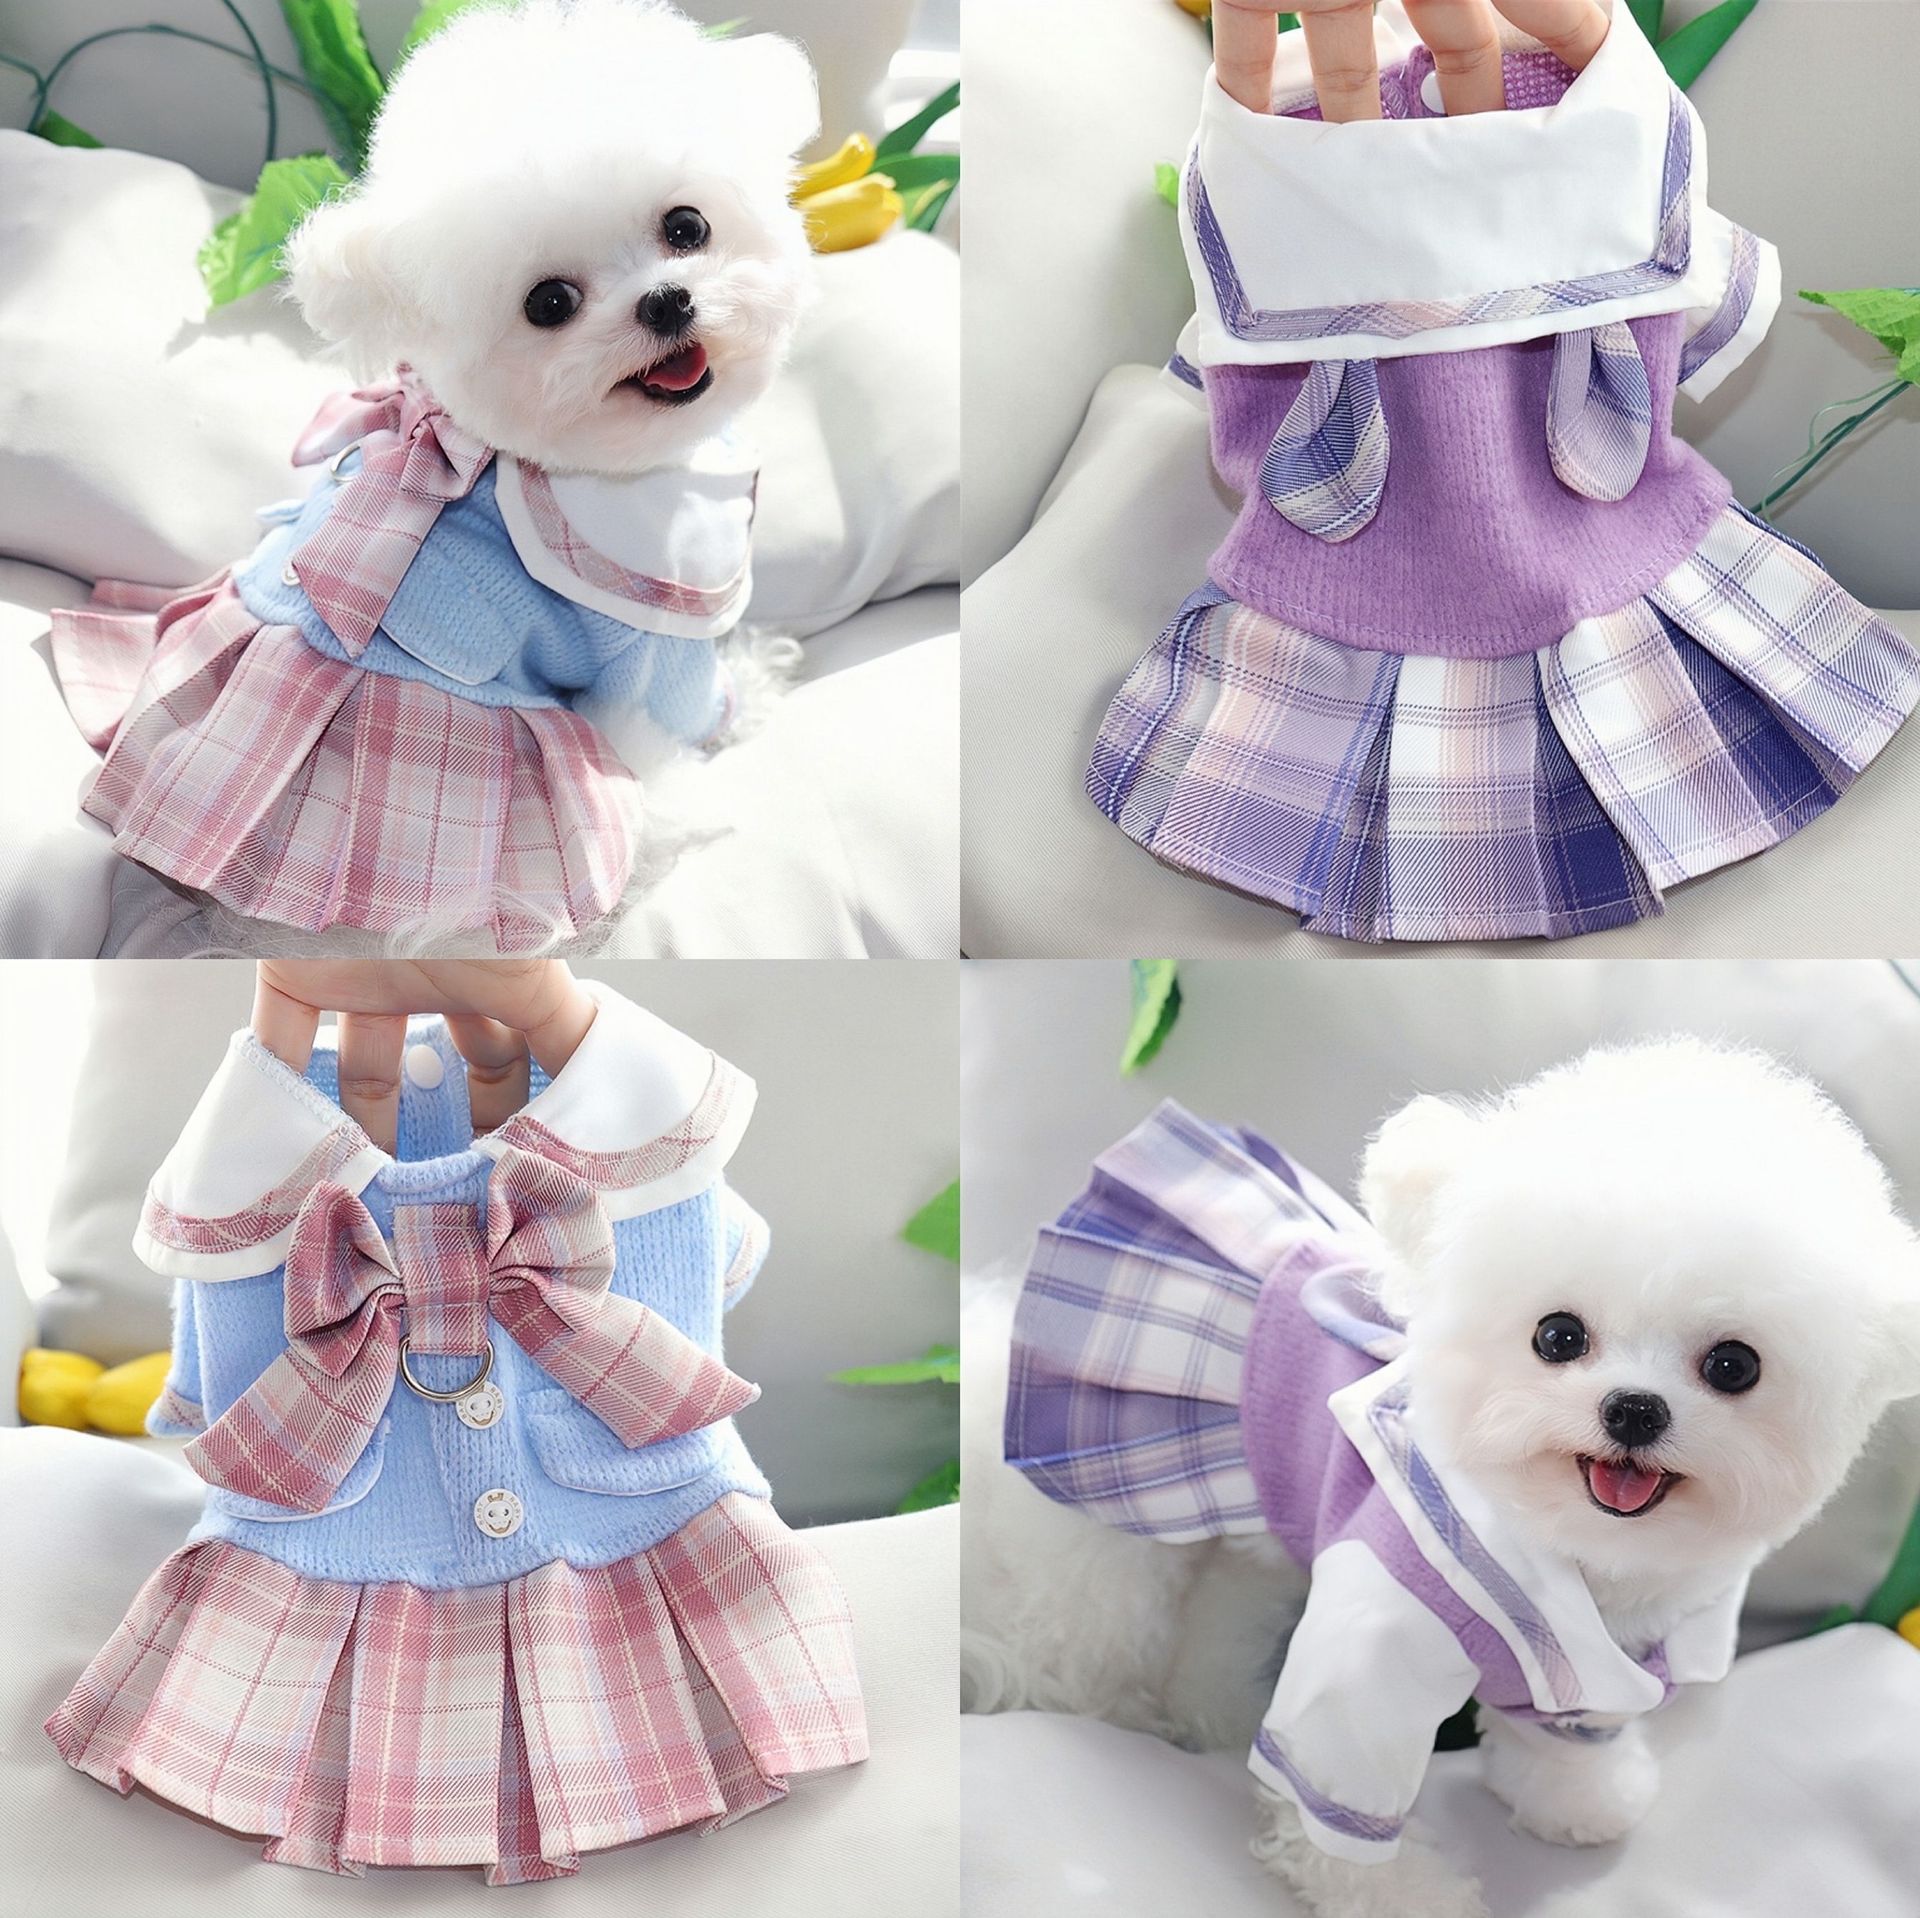 Cute Clothes – JK Style Dress For Dog